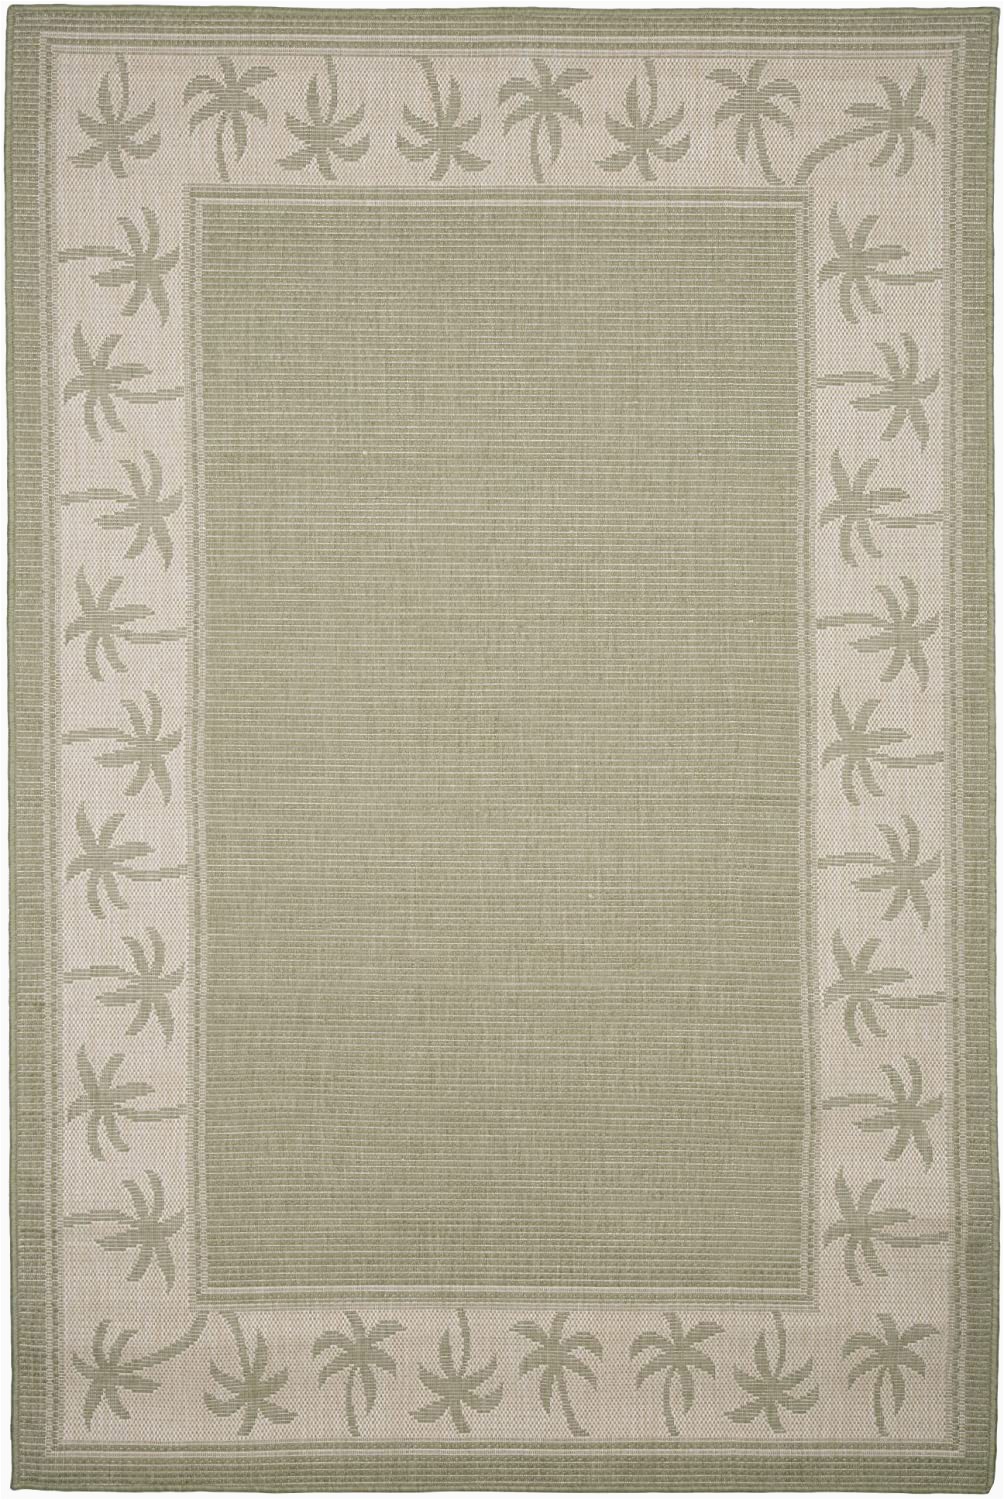 Outdoor 8 X 10 area Rugs Lavish Home 8 X 10 area Rug Indoor and Outdoor Stain Resistant Rug with Palm Trees Design Green and Beige Accent Rug for Home Decor